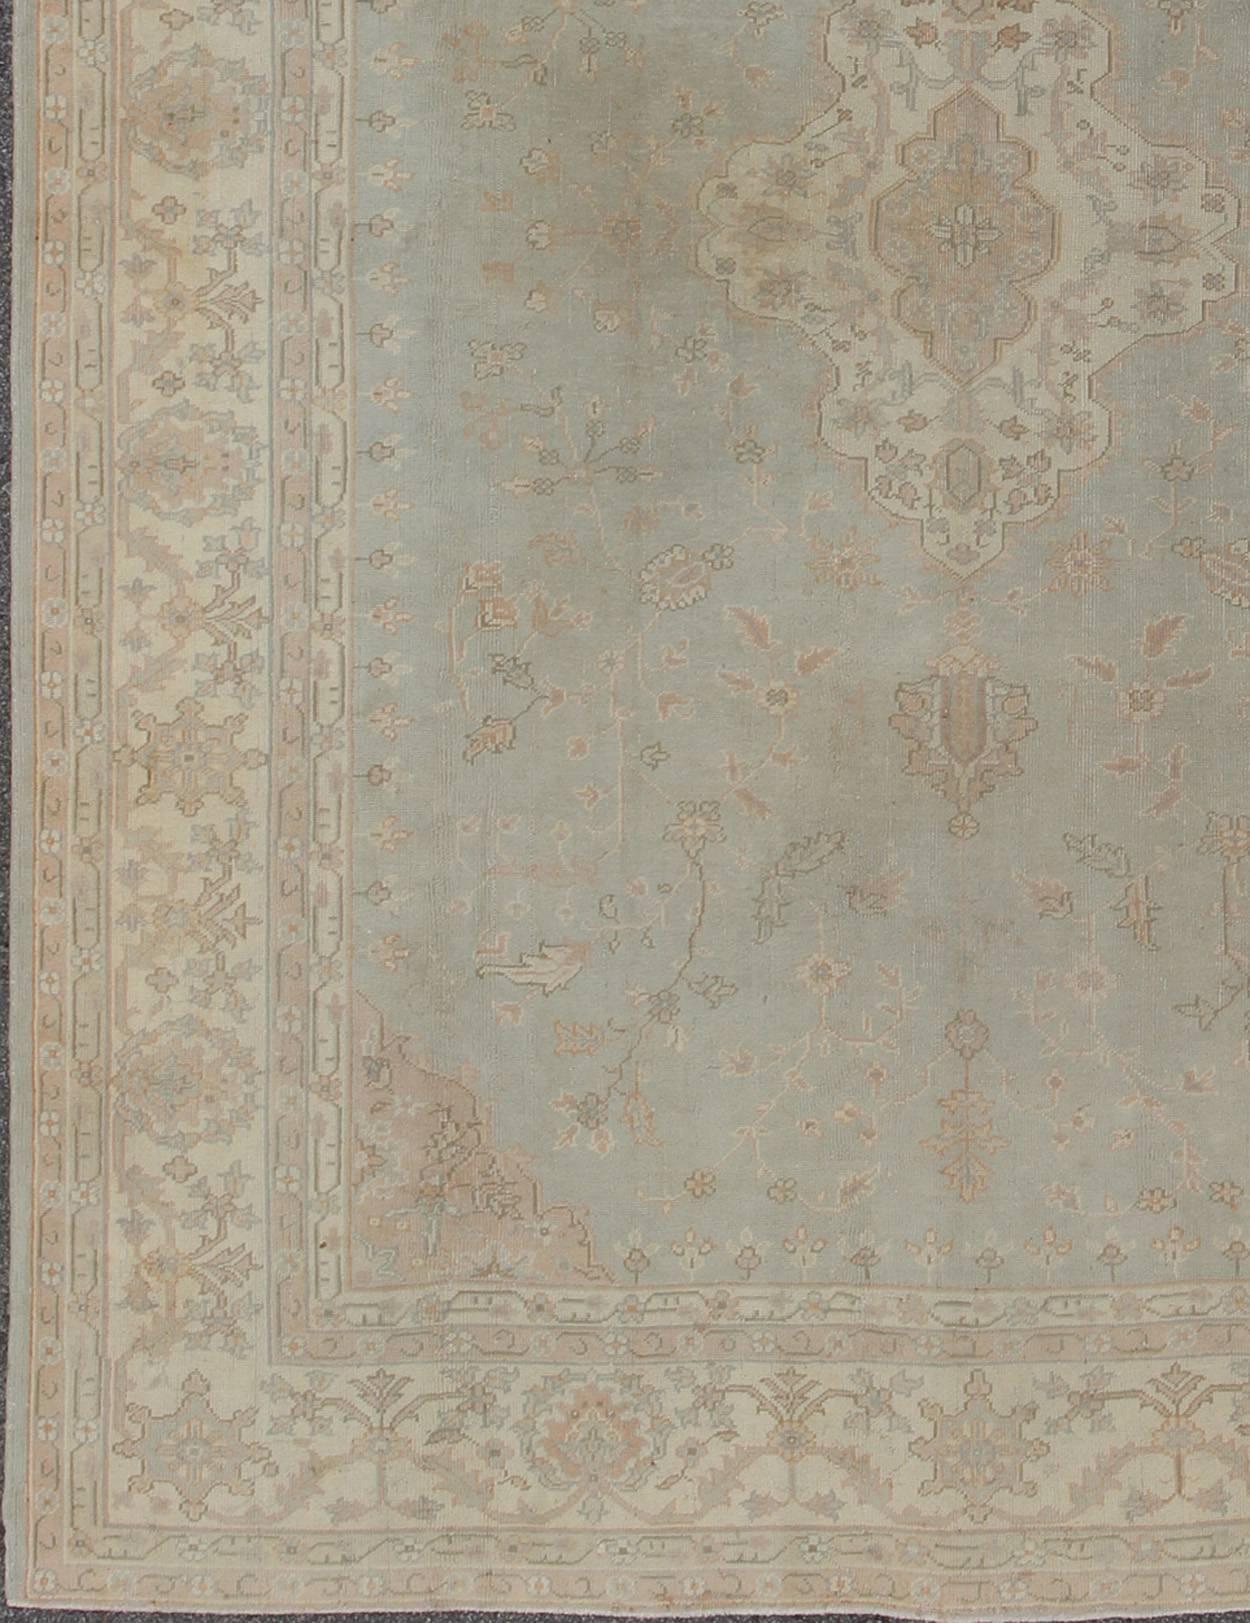 Antique Oushak carpet in pale gray blue, taupe, pink, ivory and light salmon. Keivan Woven Arts / rug IS-169, country of origin / type: Turkey / Oushak, circa 1920. 
Measures: 10' X 13'2.
This antique Oushak bears a refined beauty due to its soft